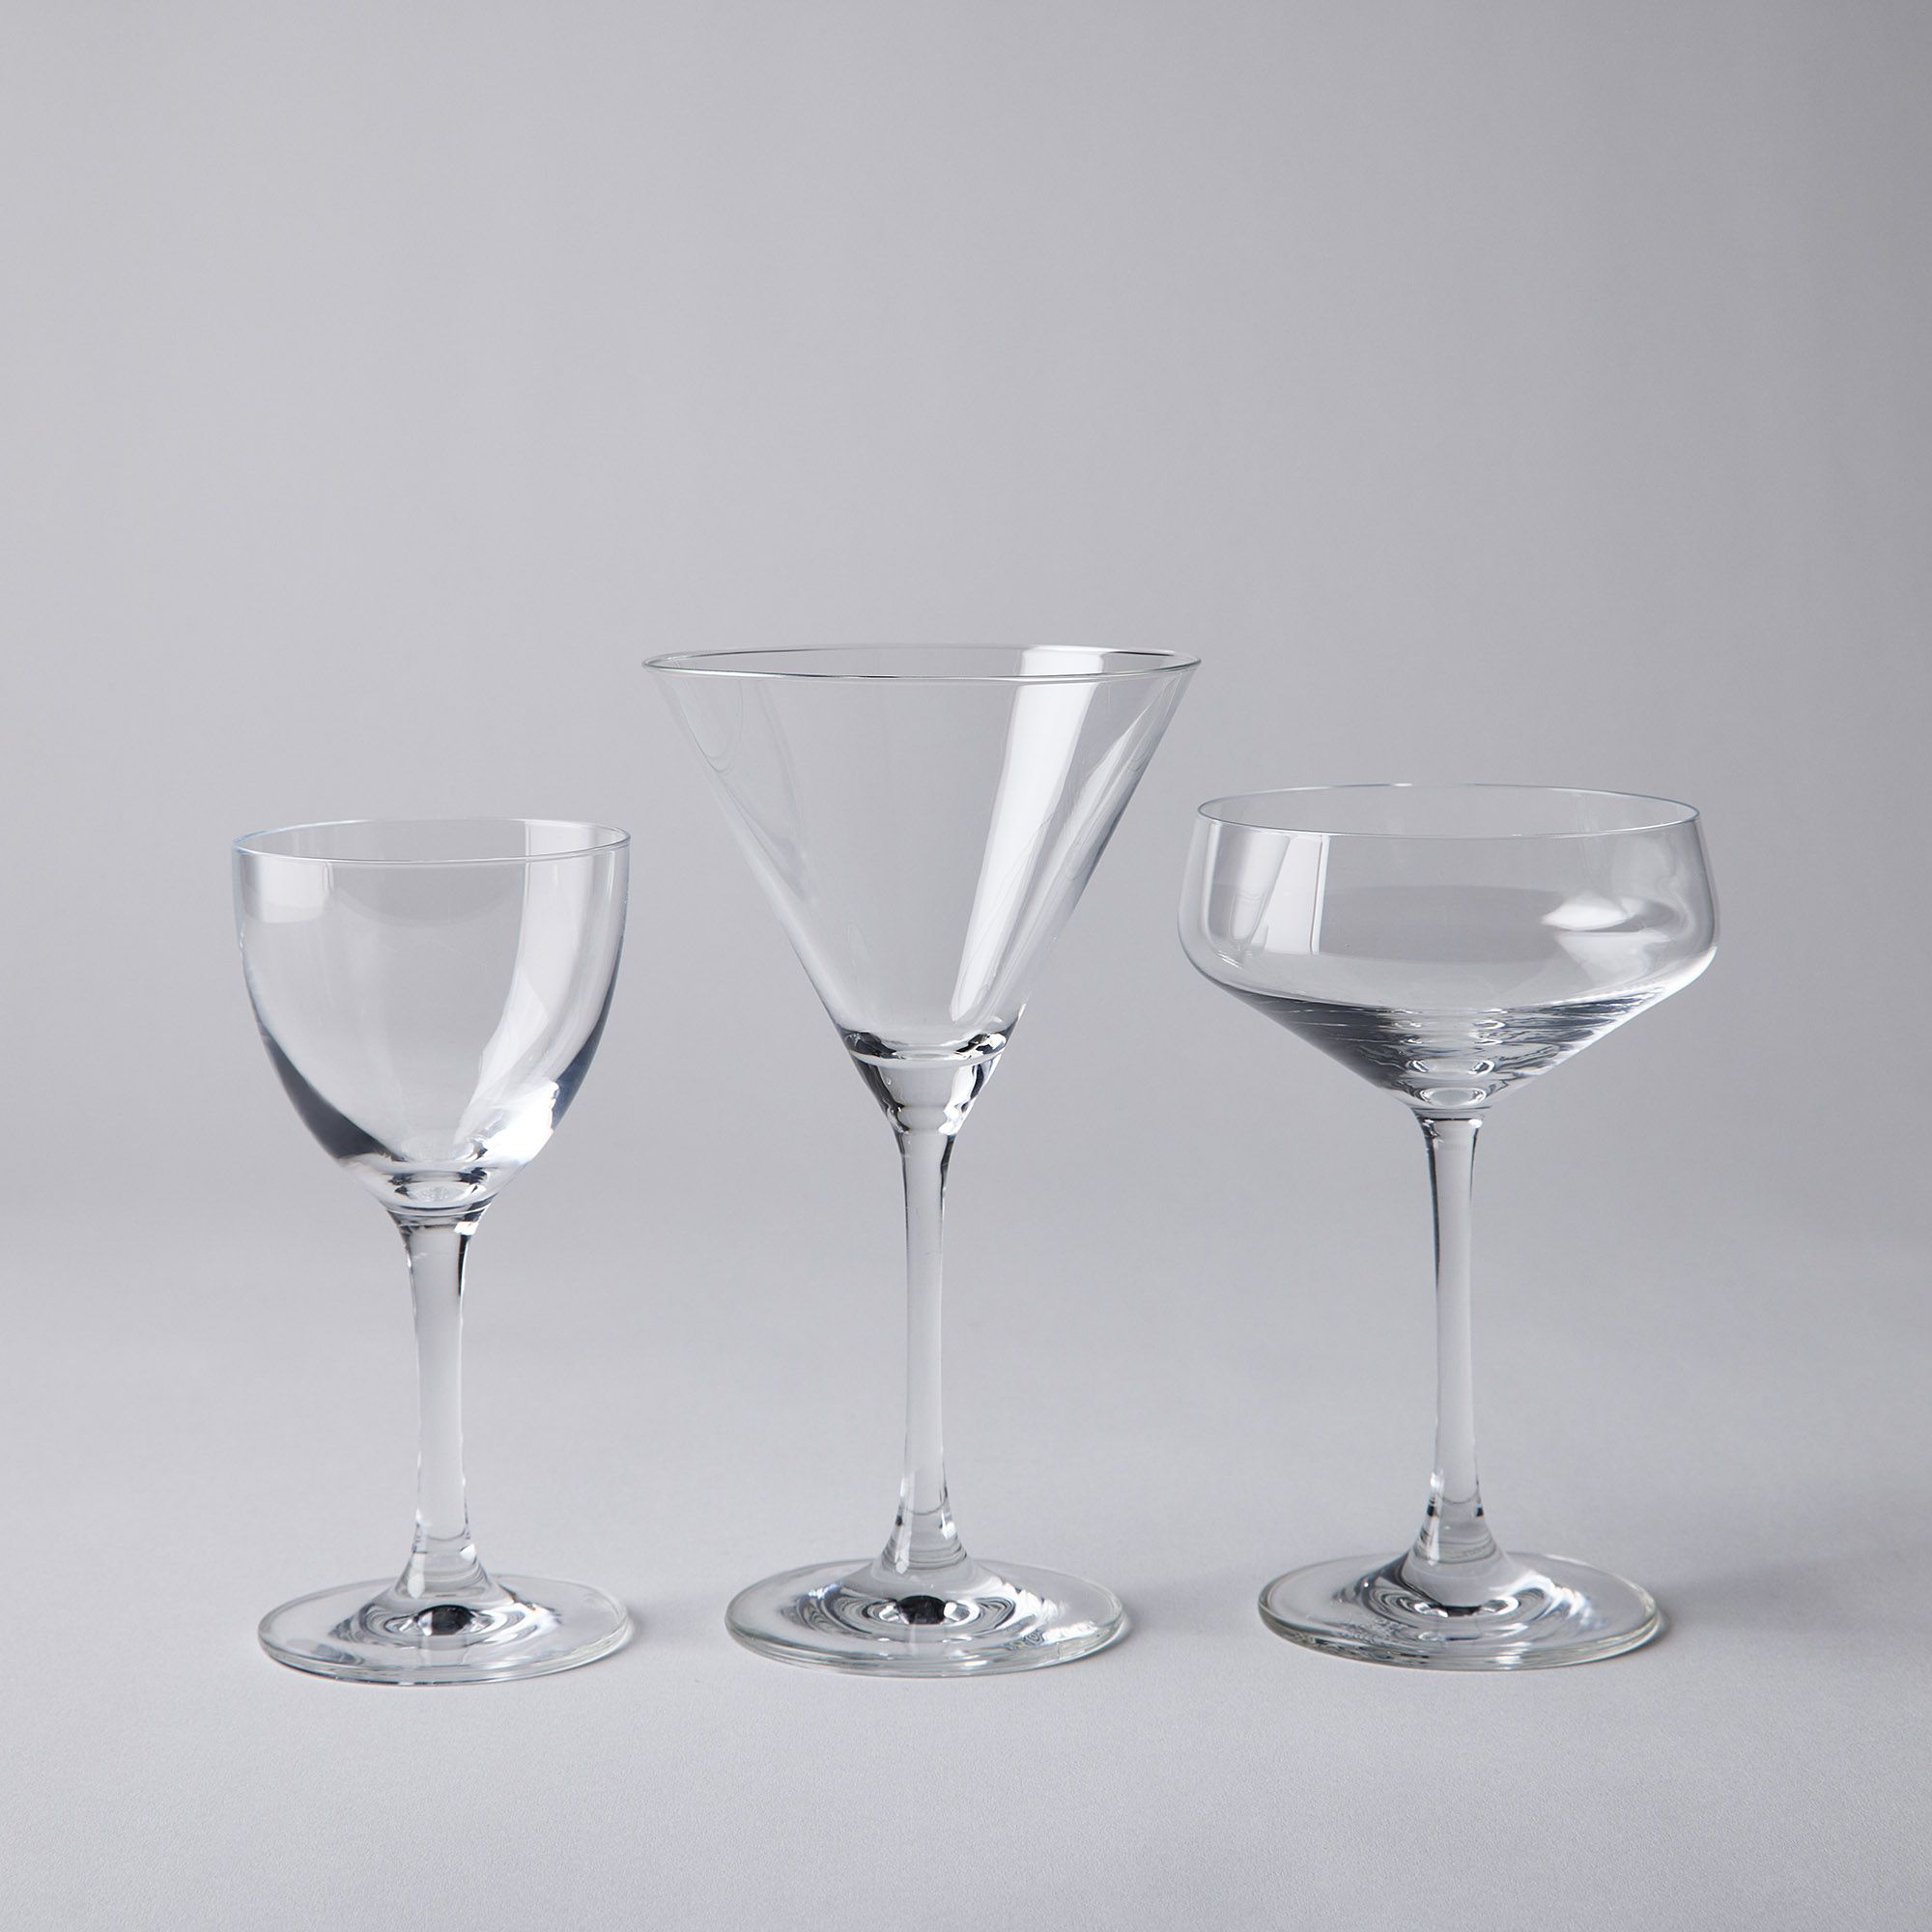 Complete Zwiesel Classic Glasses Schott Cocktail on 12-Piece Bar Exclusive Set, Food52